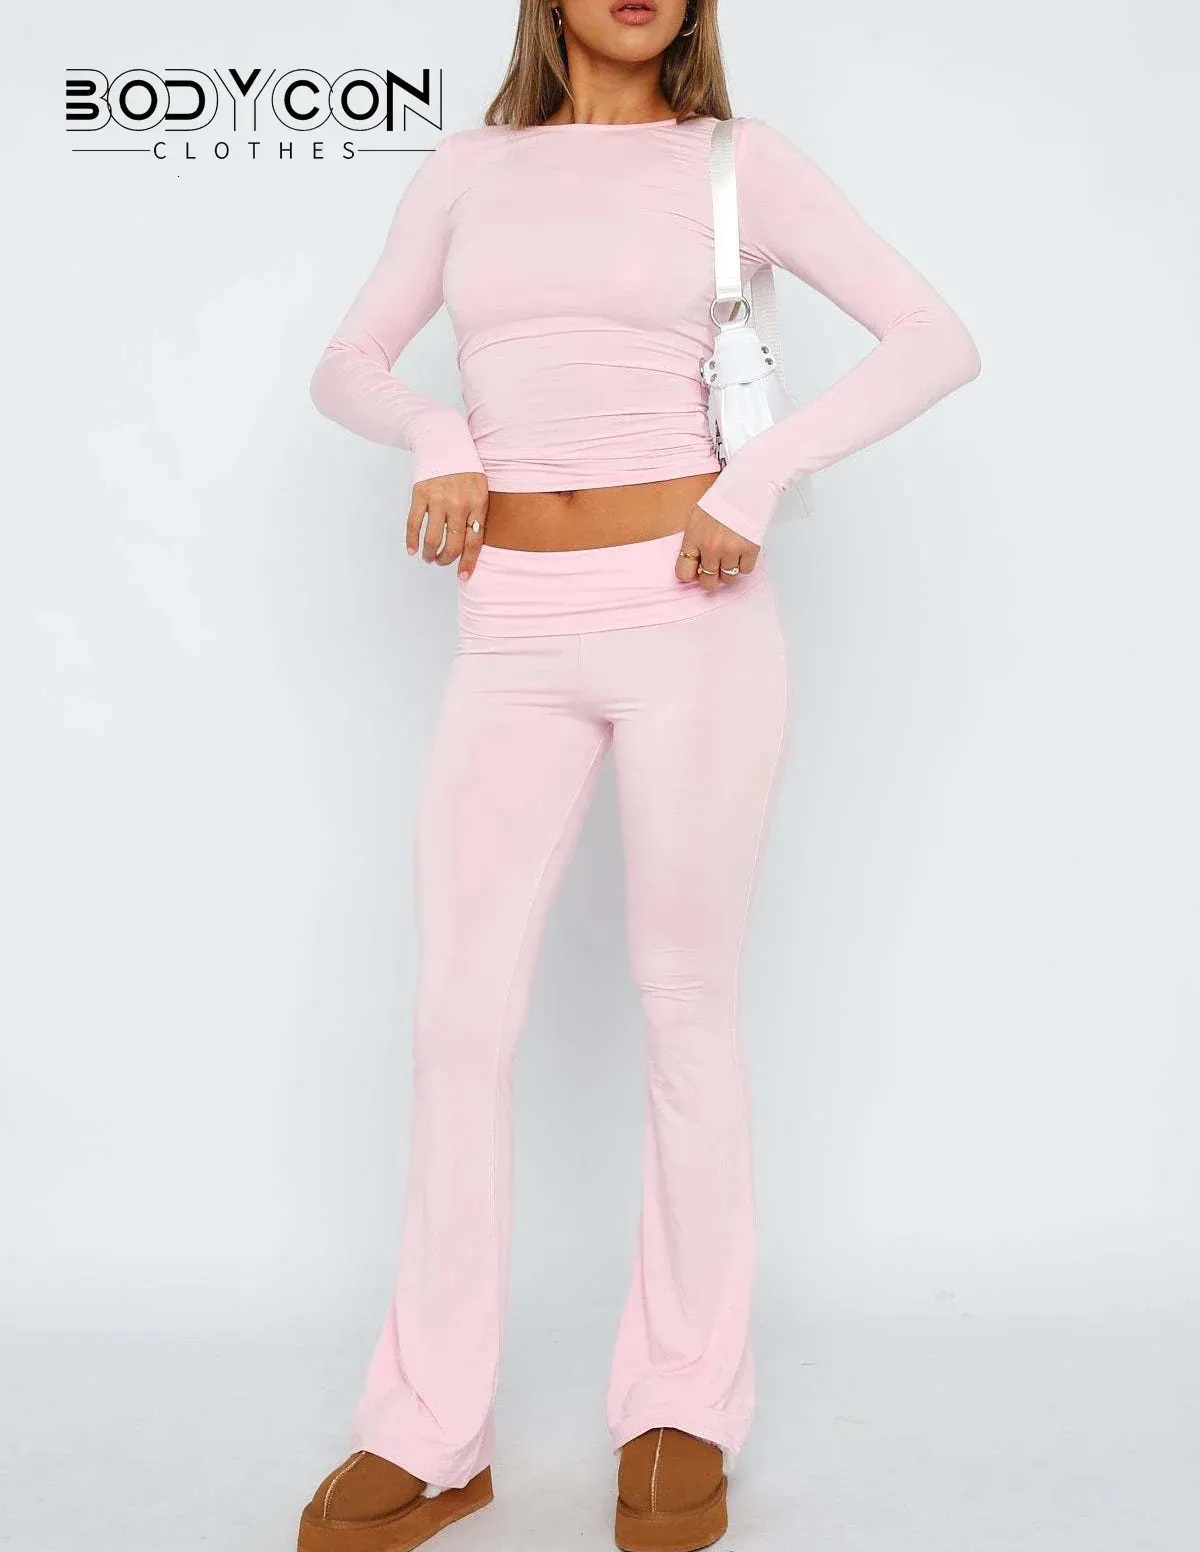 FALL STALL CASISSEN 2 -teilige Outfits Langarm Crew Neck Crop Tops und niedrige Taille Flare Long Pants Loungs Sets Trailsuits 240418